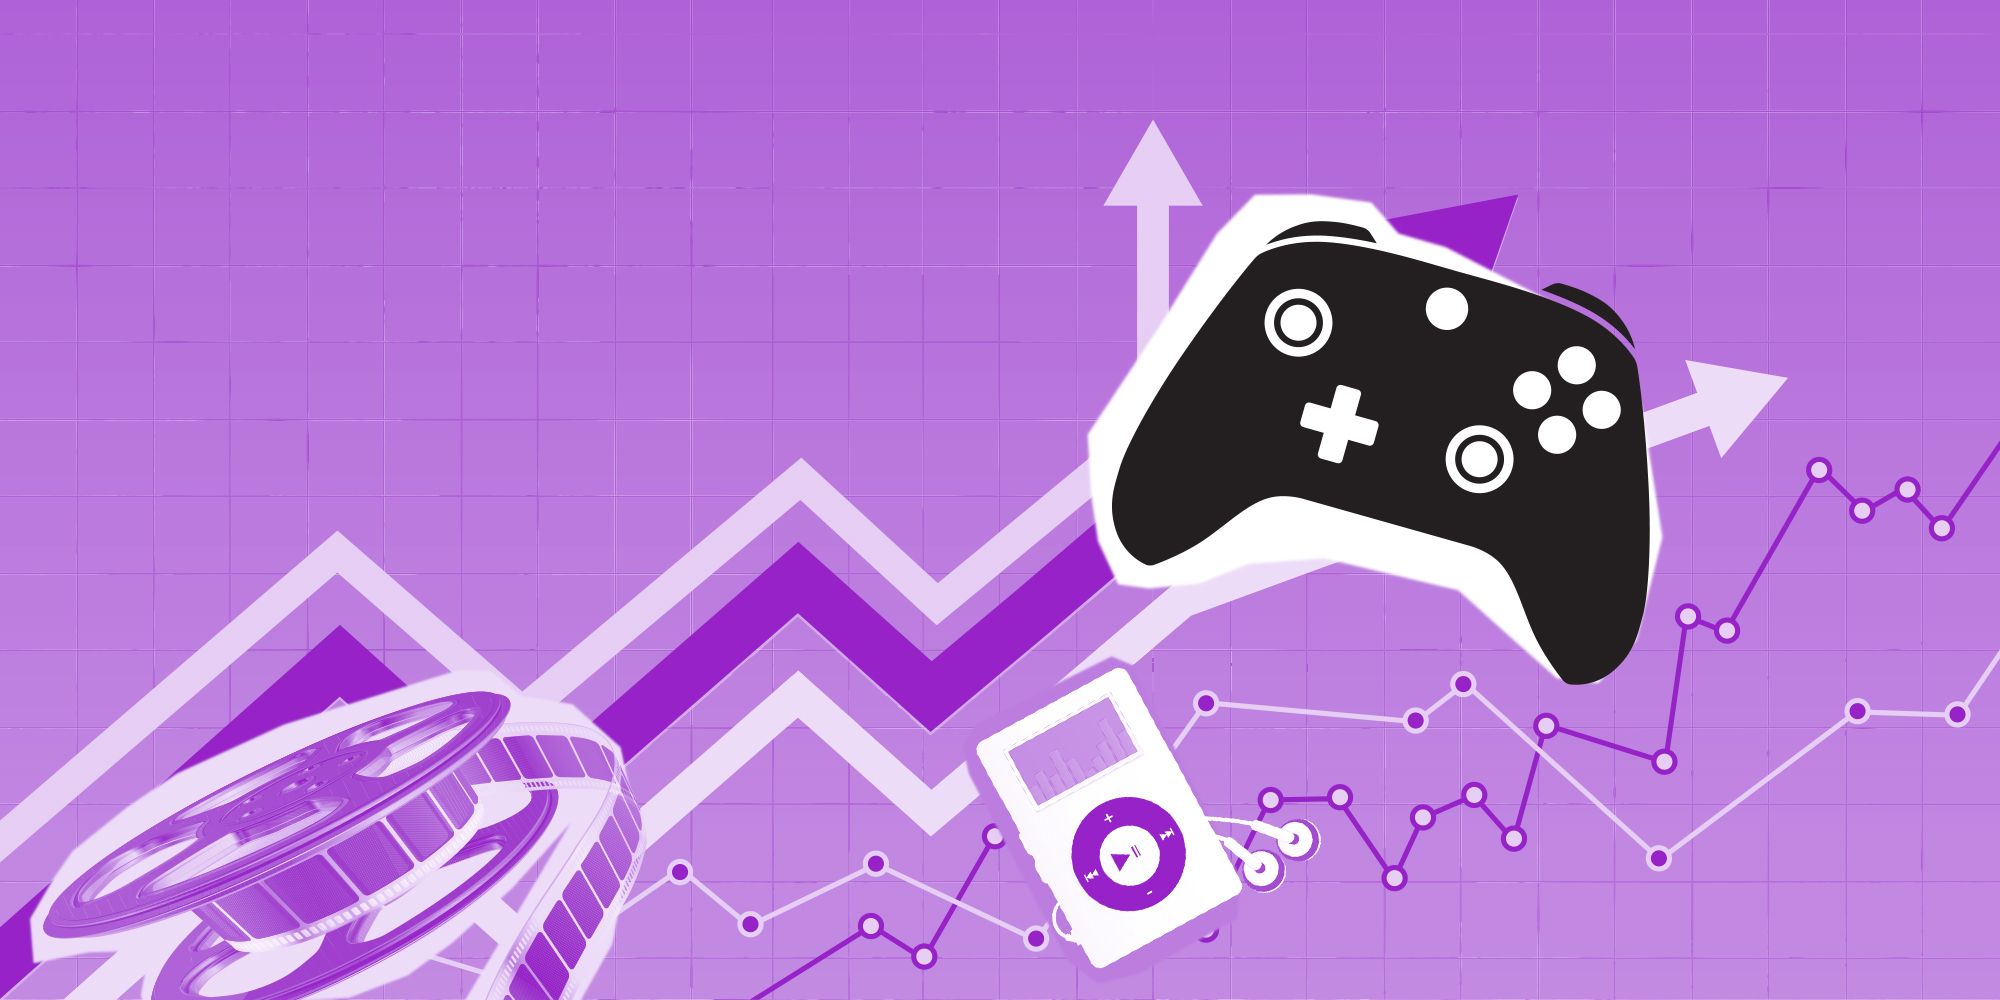 An image of a video games controller on a graph showing the rise of the industry especially compared to music and movies